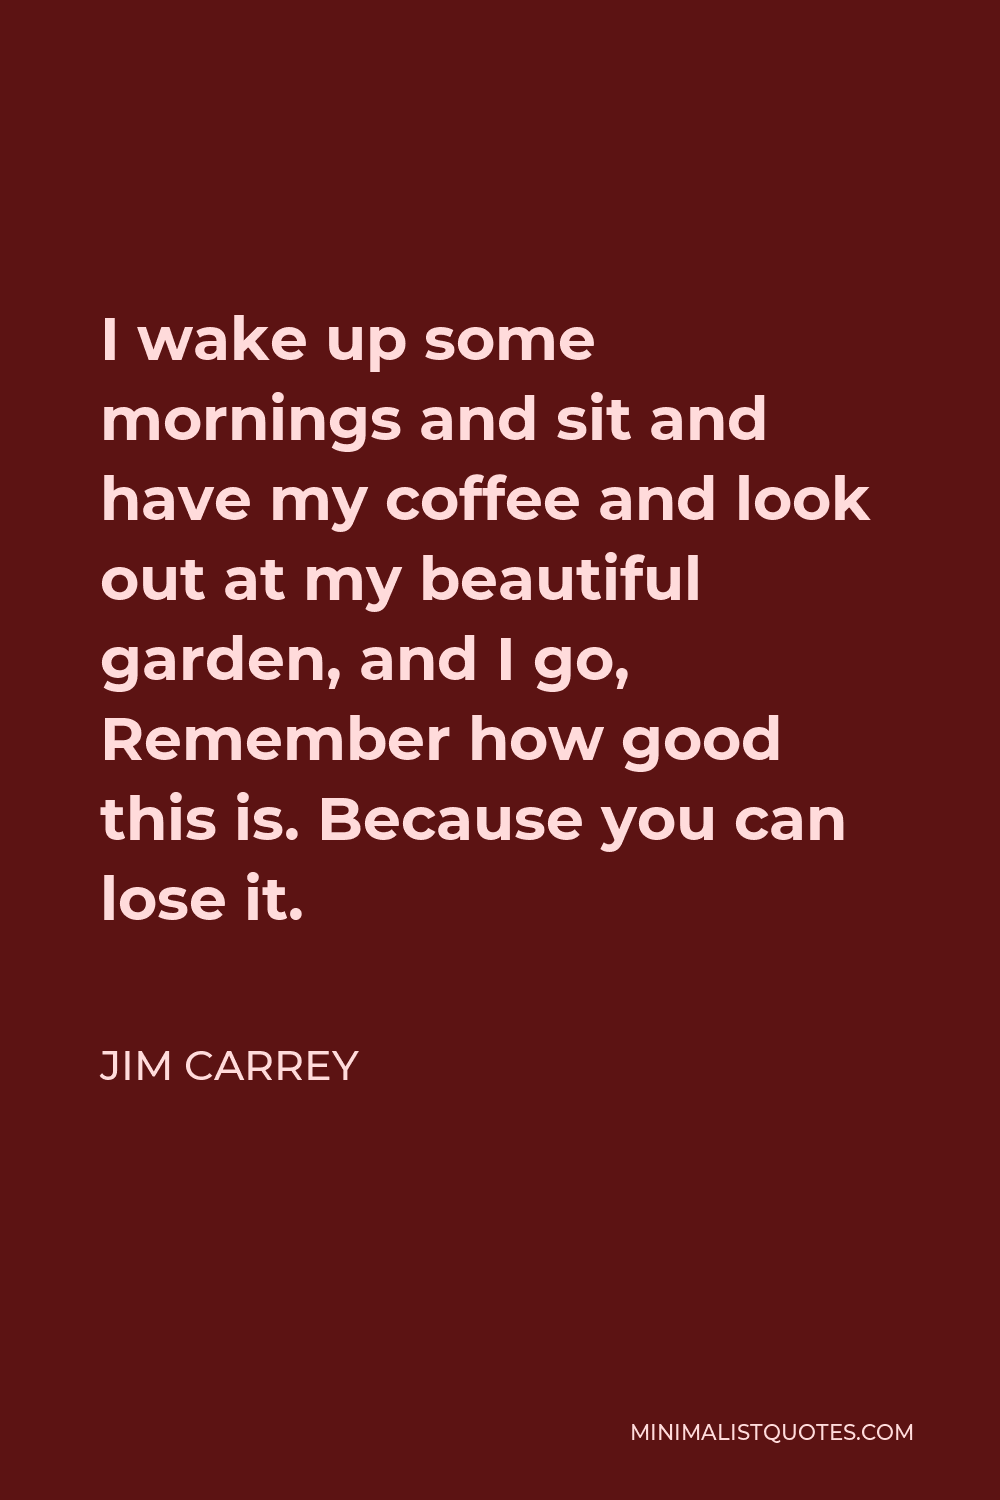 Jim Carrey Quote - I wake up some mornings and sit and have my coffee and look out at my beautiful garden, and I go, Remember how good this is. Because you can lose it.